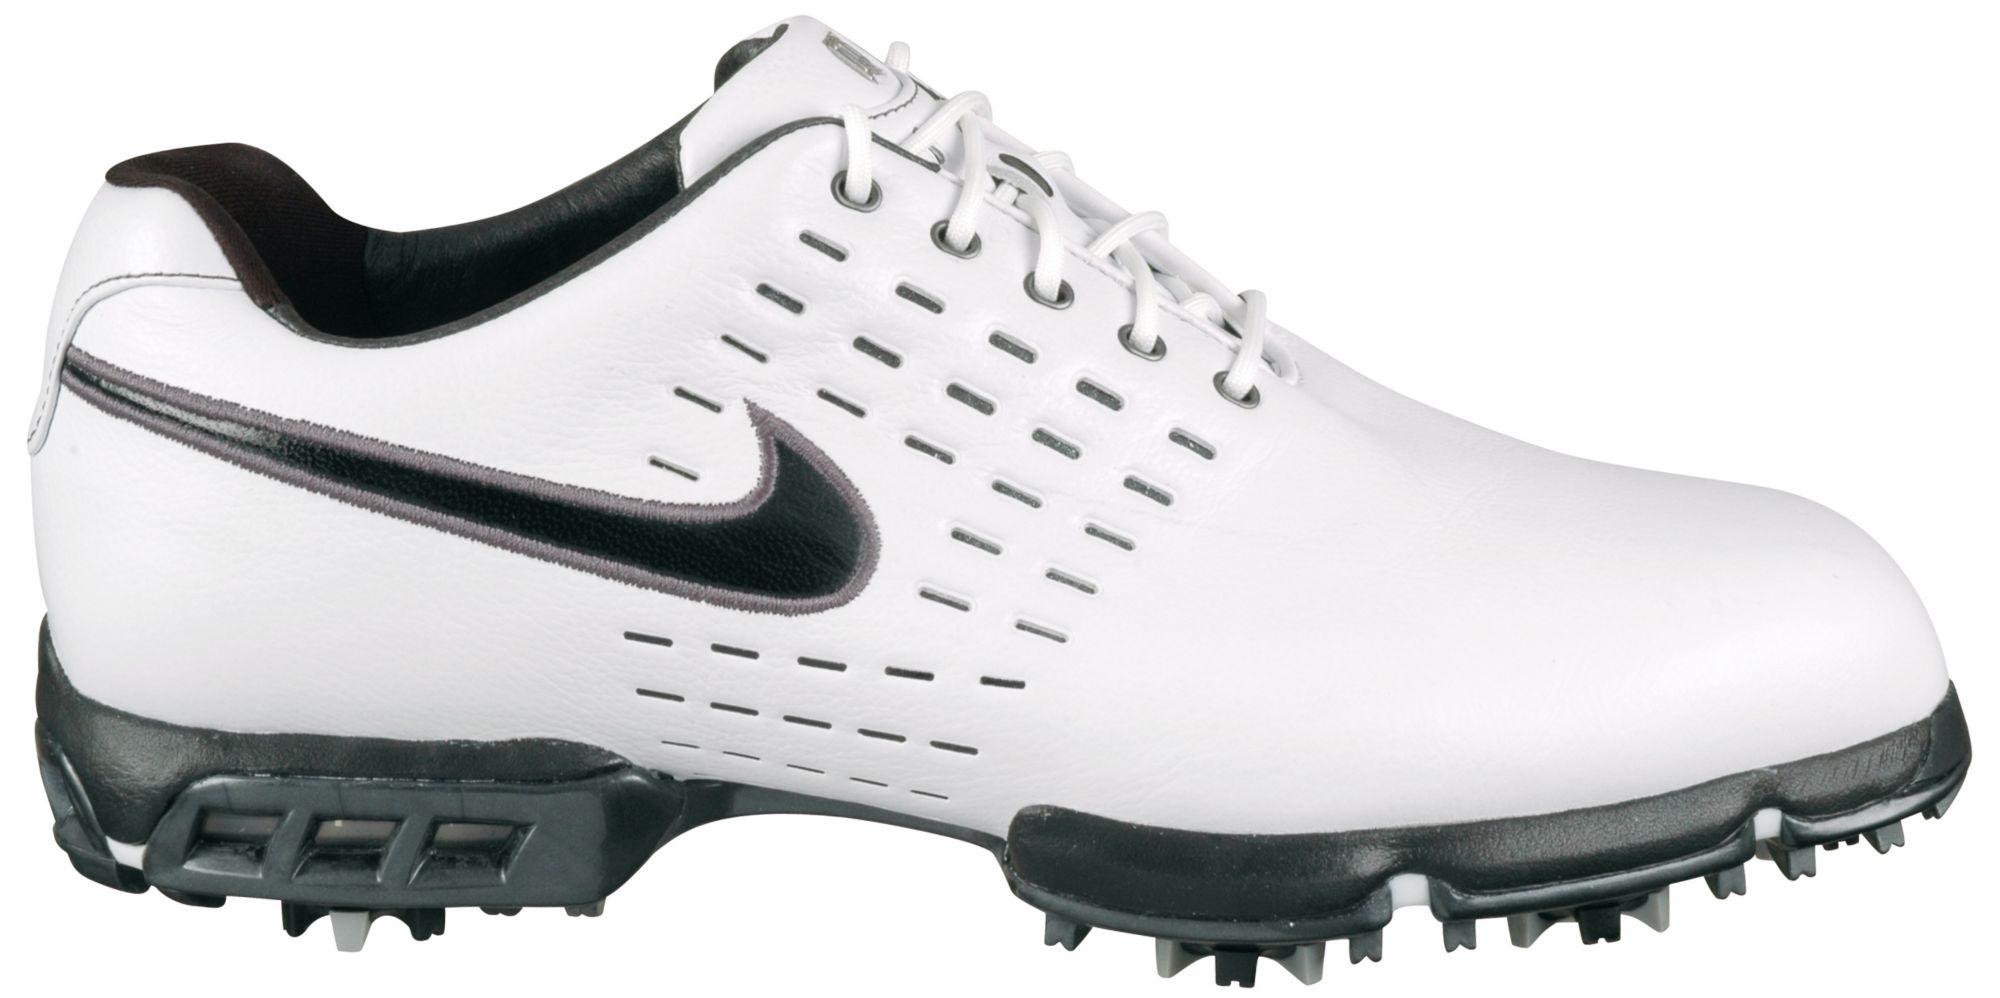 Nike Golf Shoes on Nike Golf Shoes   Nike Mens Golf Shoes For Sale At Discount Golf Shoe